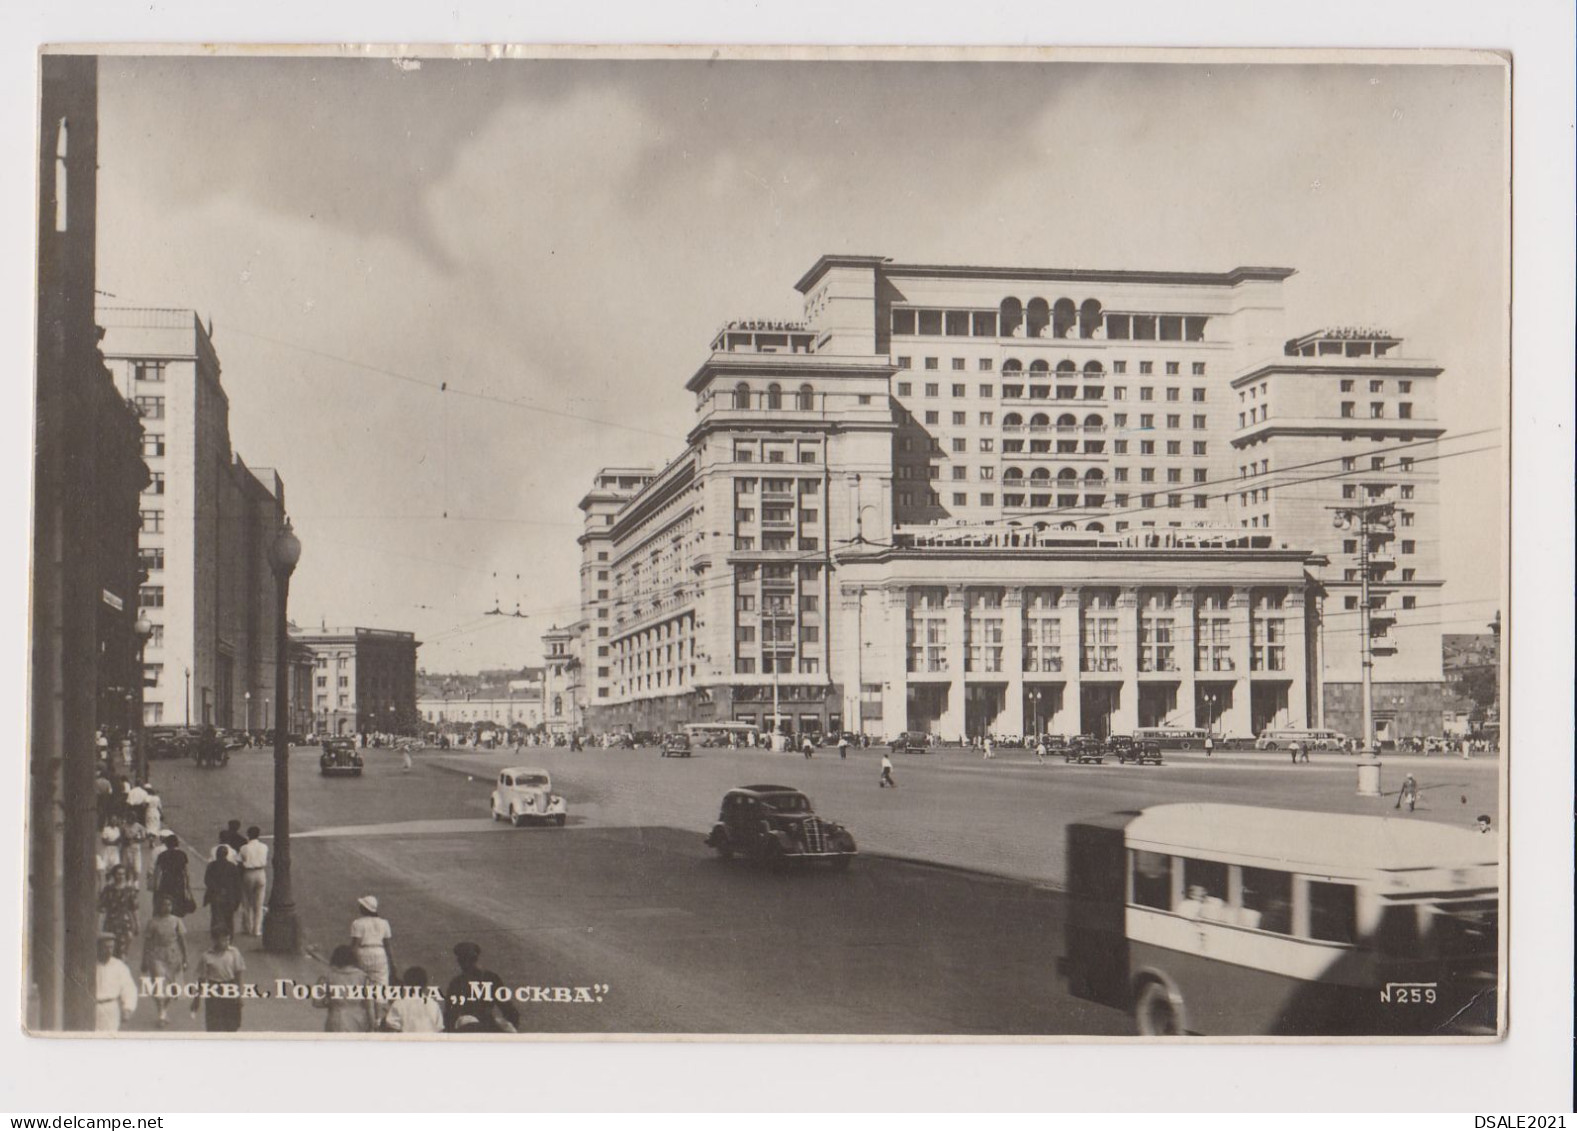 Soviet Union Russia USSR Moscow Hotel "MOSCOW", Street, Old Cars, View 1950s Photo Postcard RPPc AK (36954) - Russia